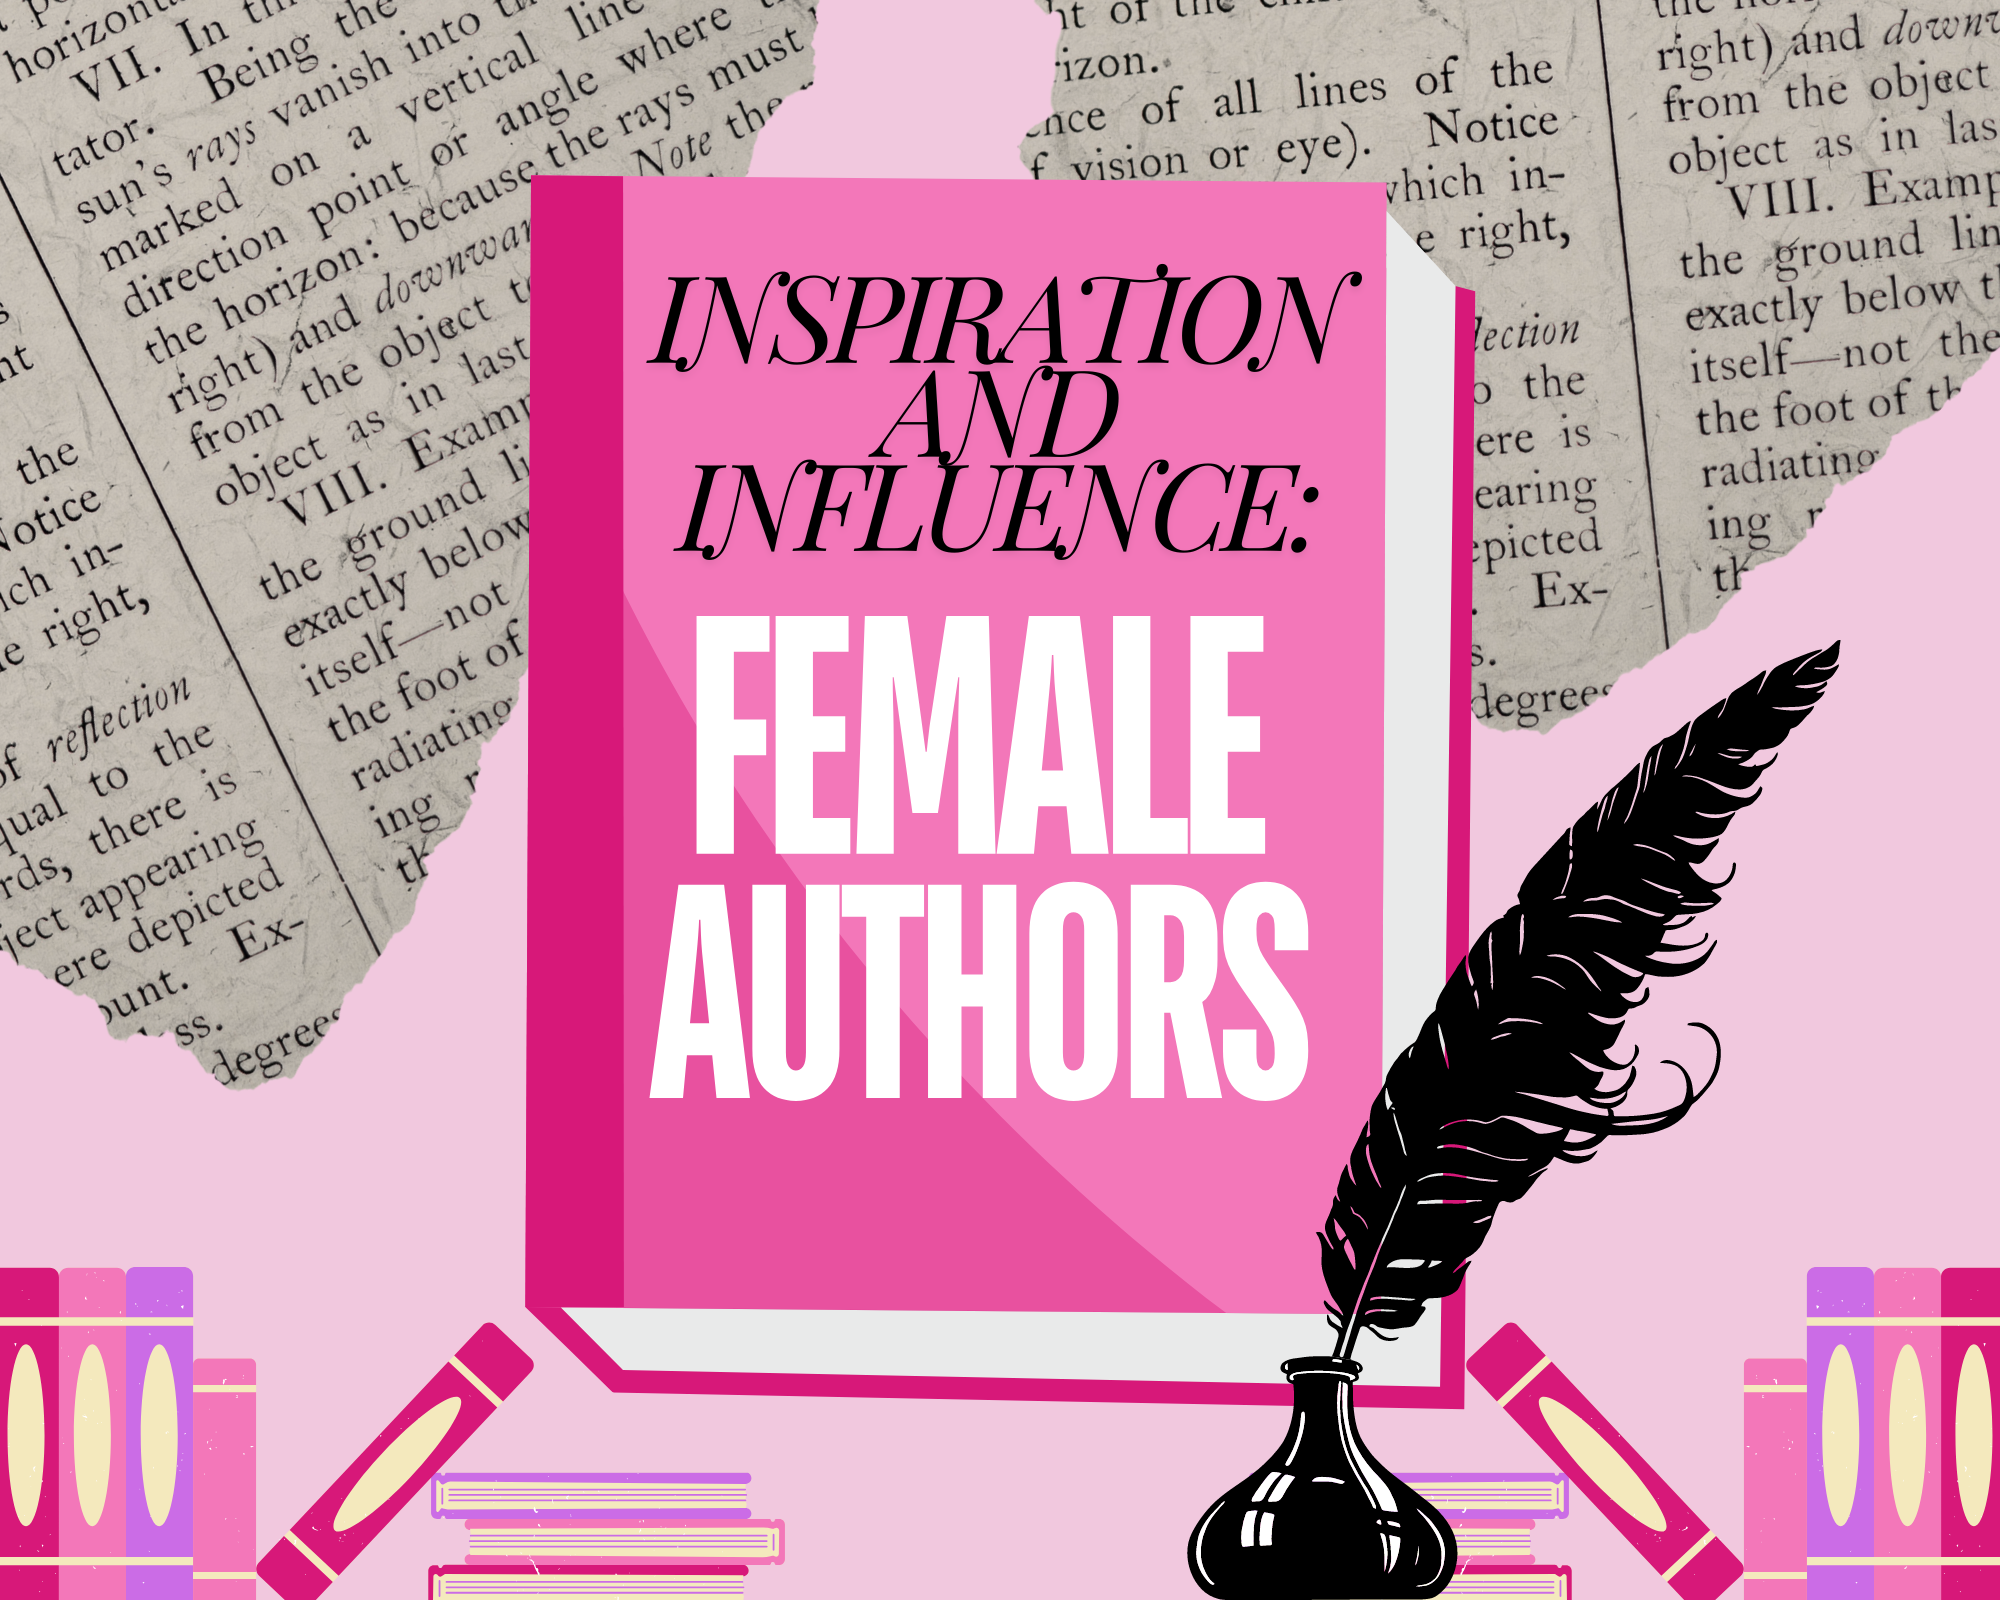 Image: Book titled 'inspiration and influence: female authors'